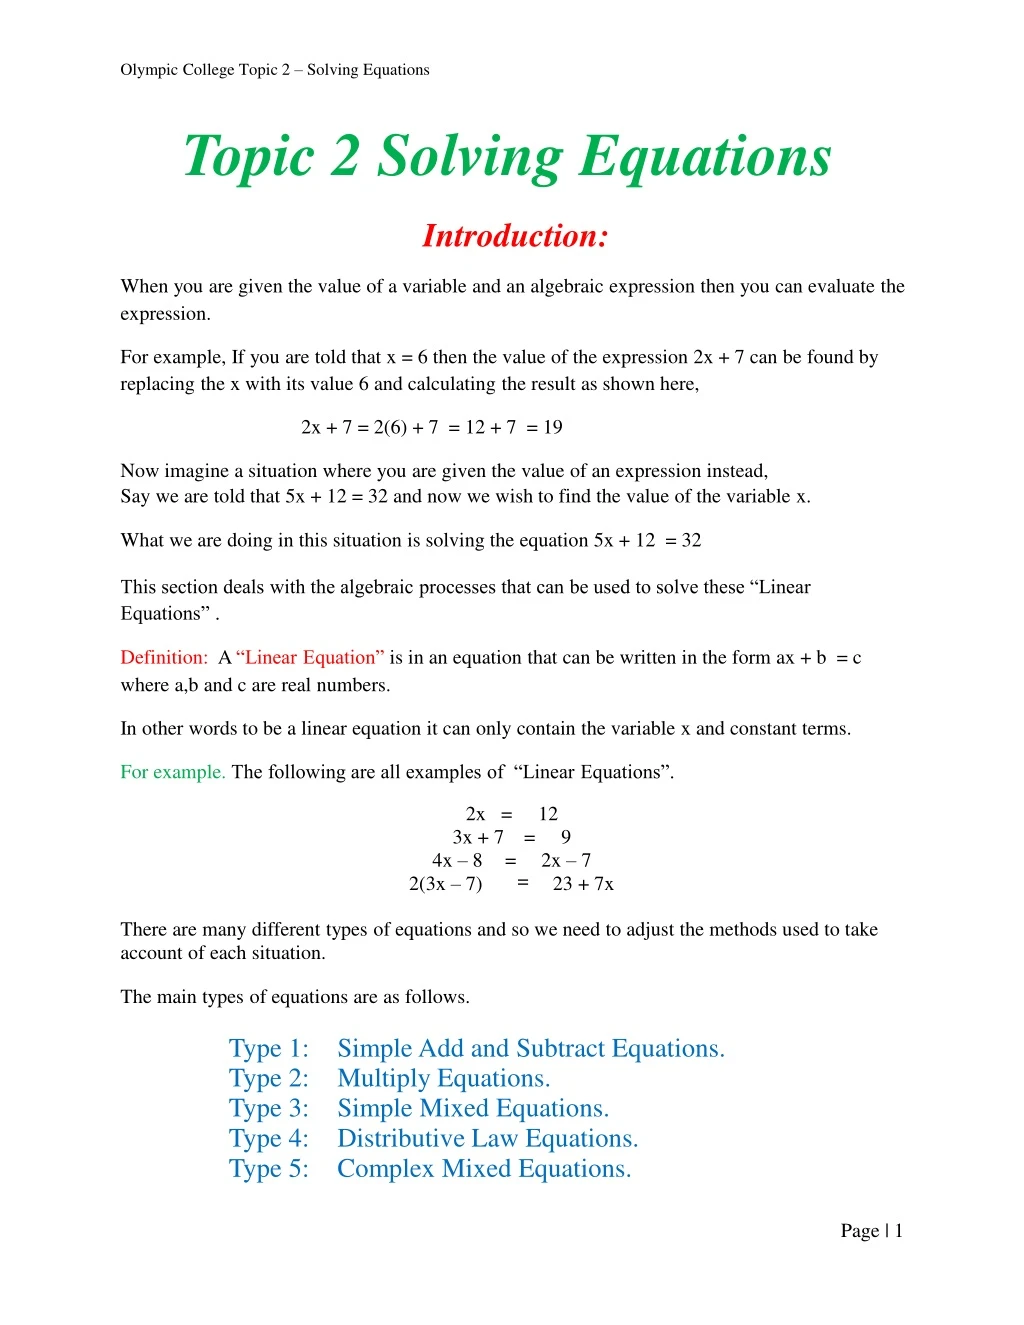 olympic college topic 2 solving equations topic